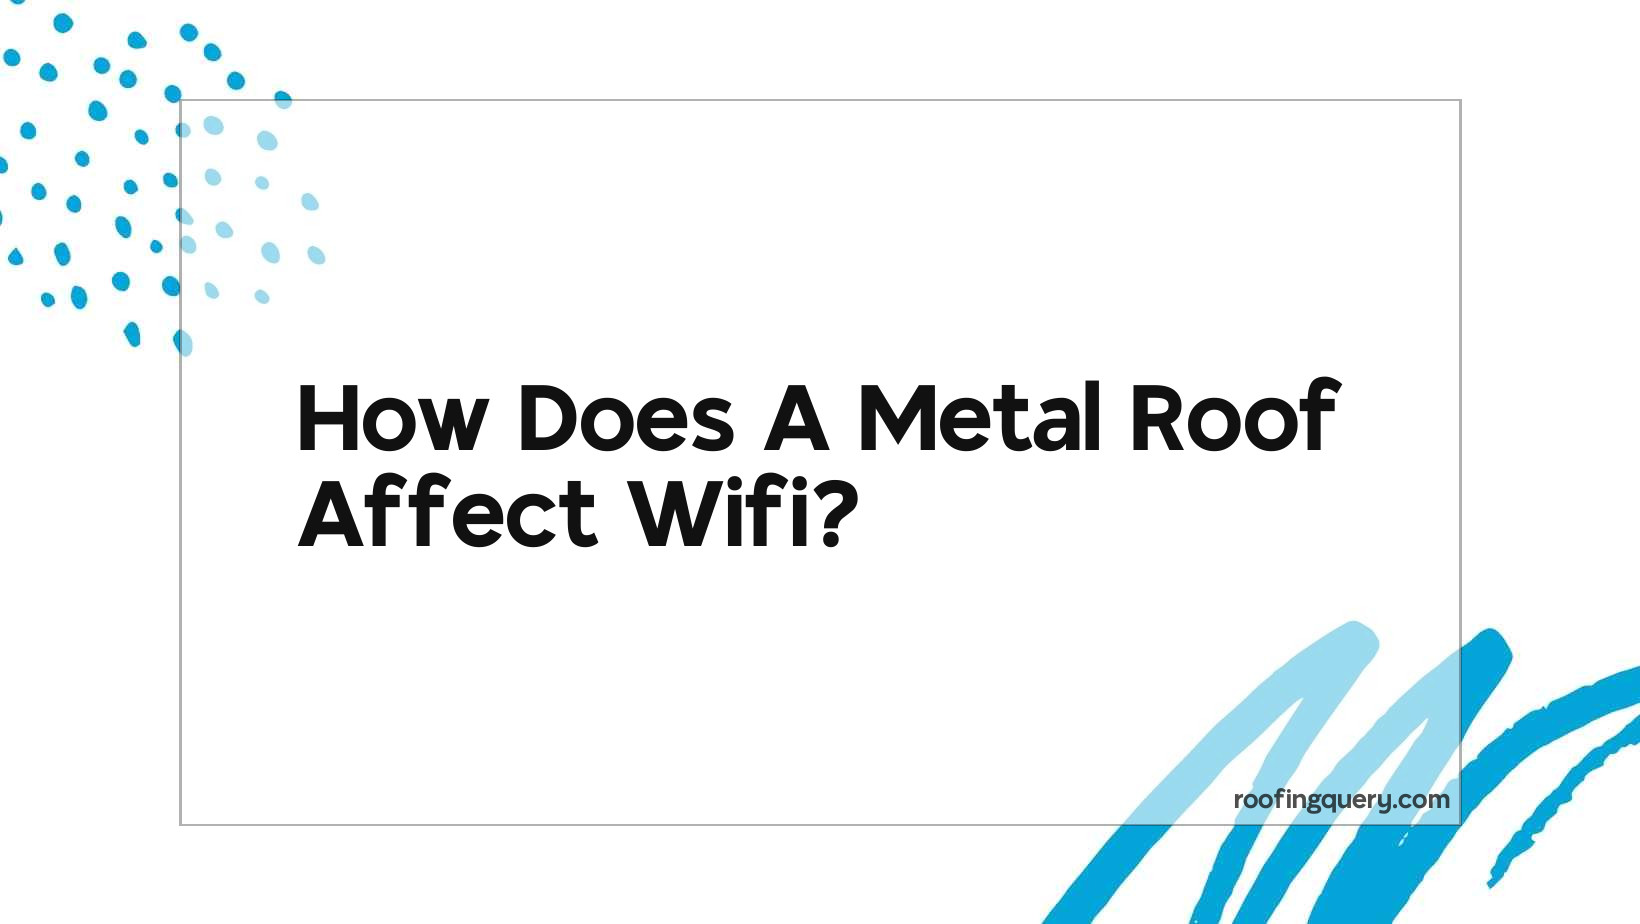 How Does A Metal Roof Affect Wifi?